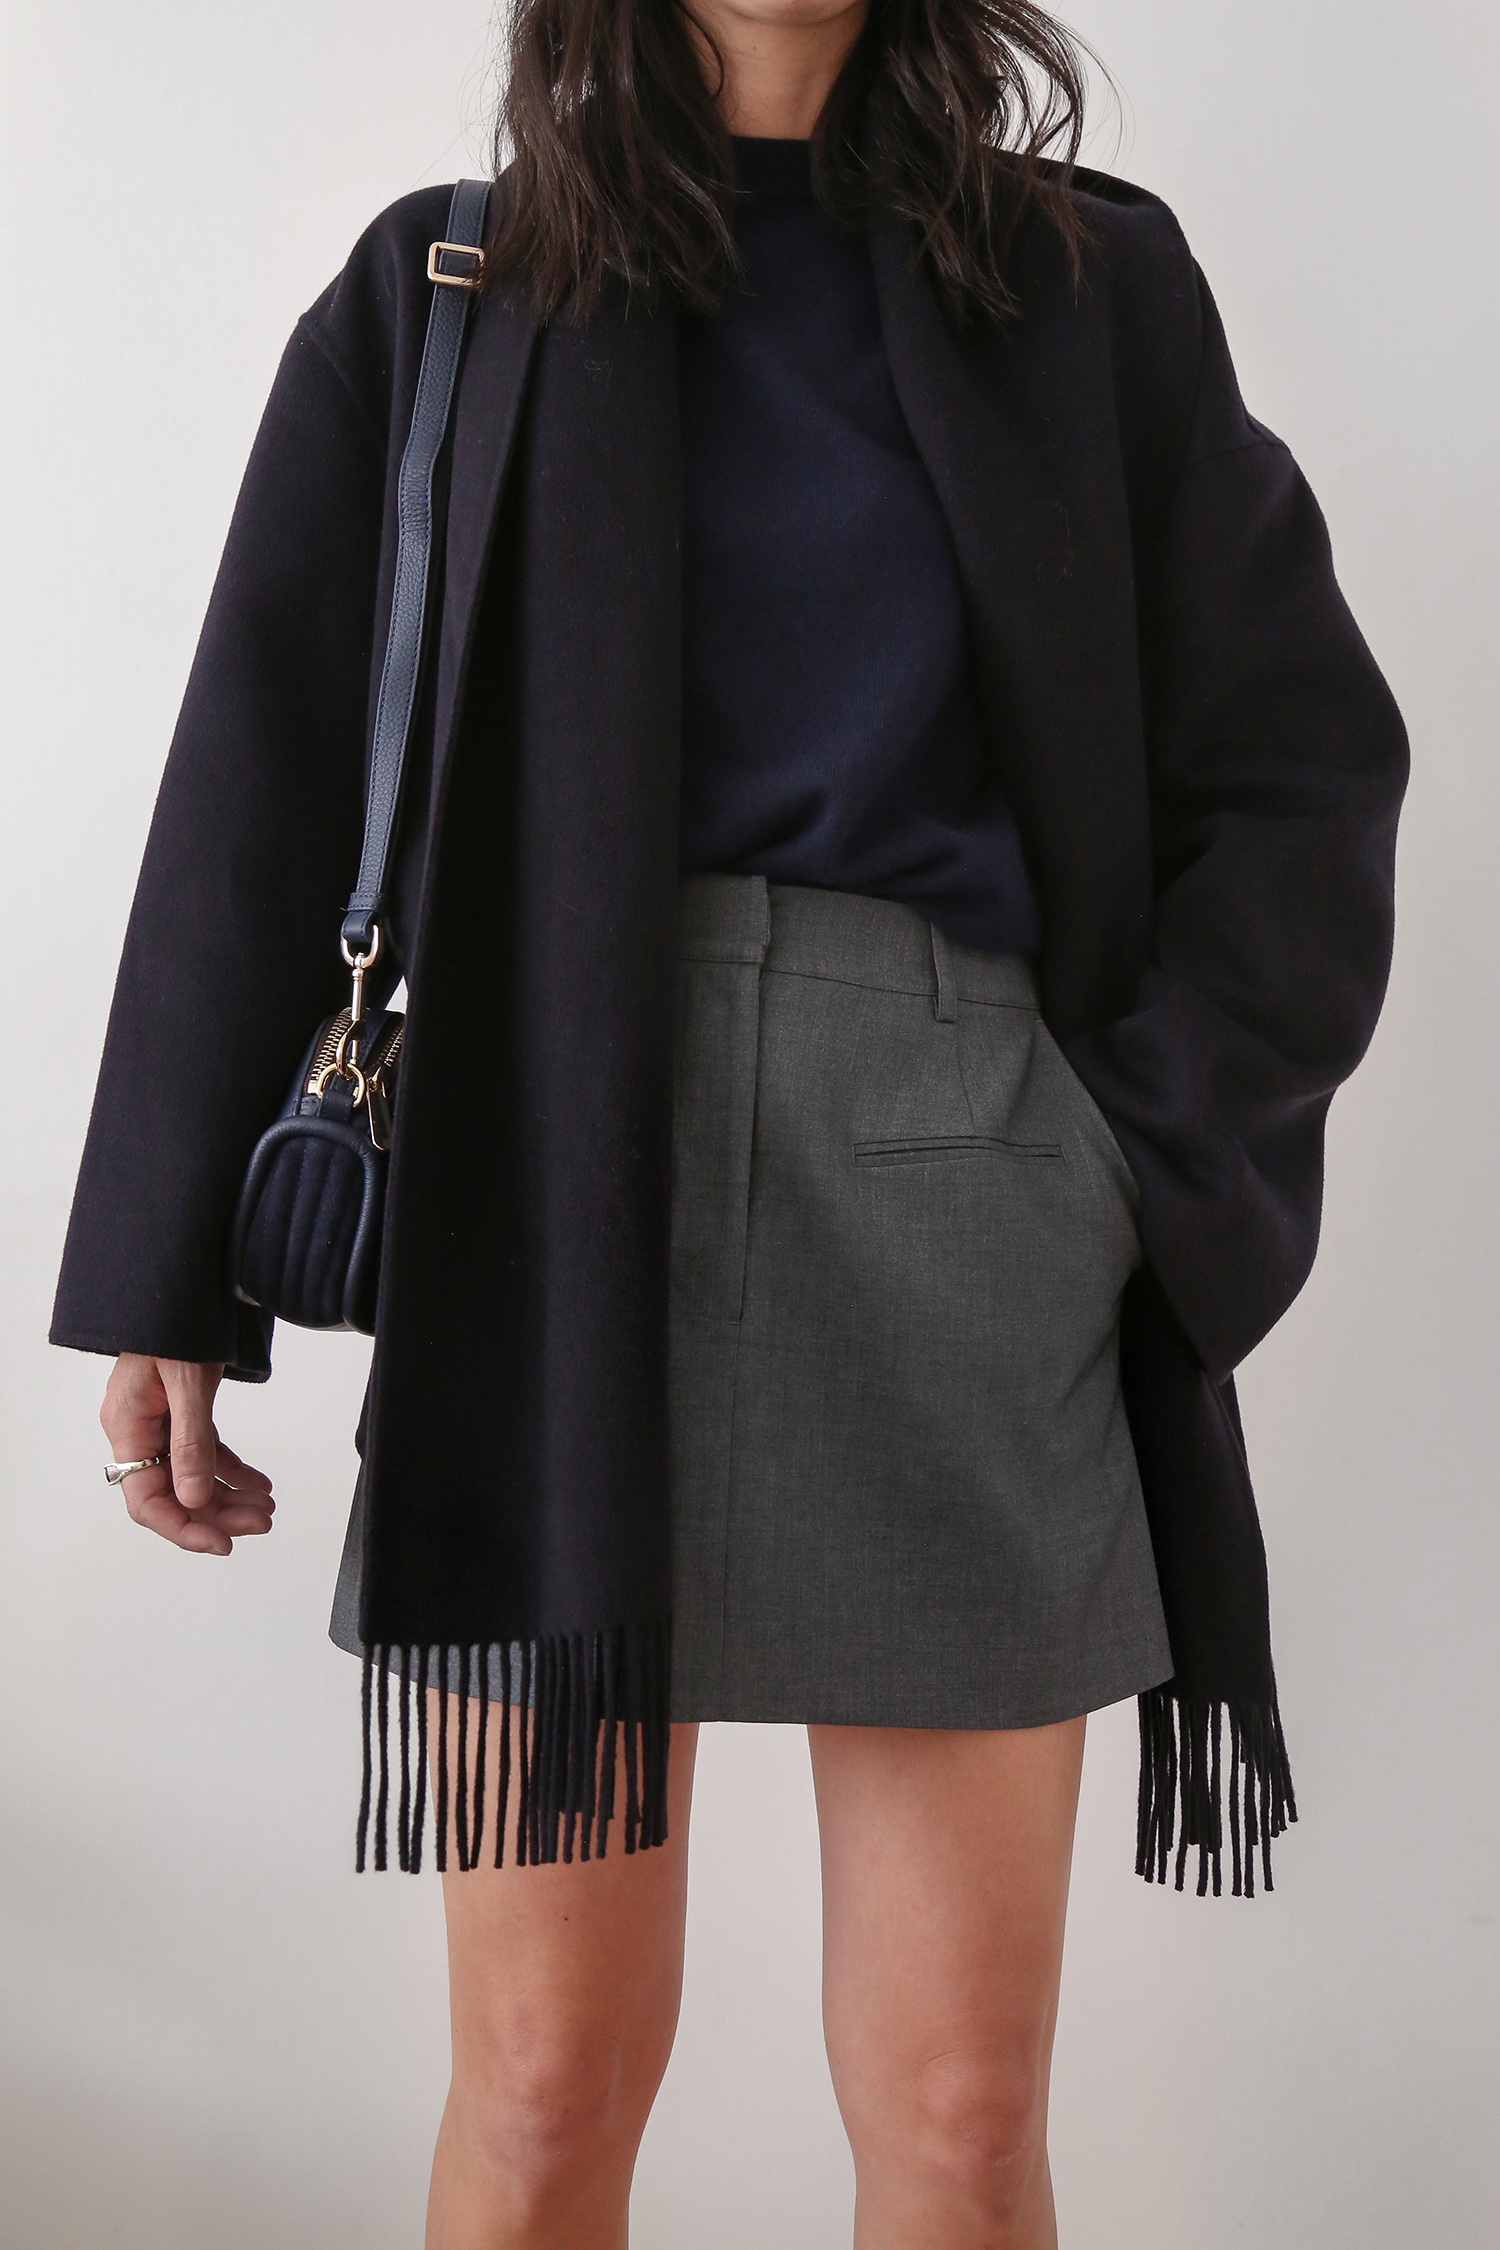 Wearing Assembly Label cashmere and Minima Esenciales Lorne skirt with COS scarf coat